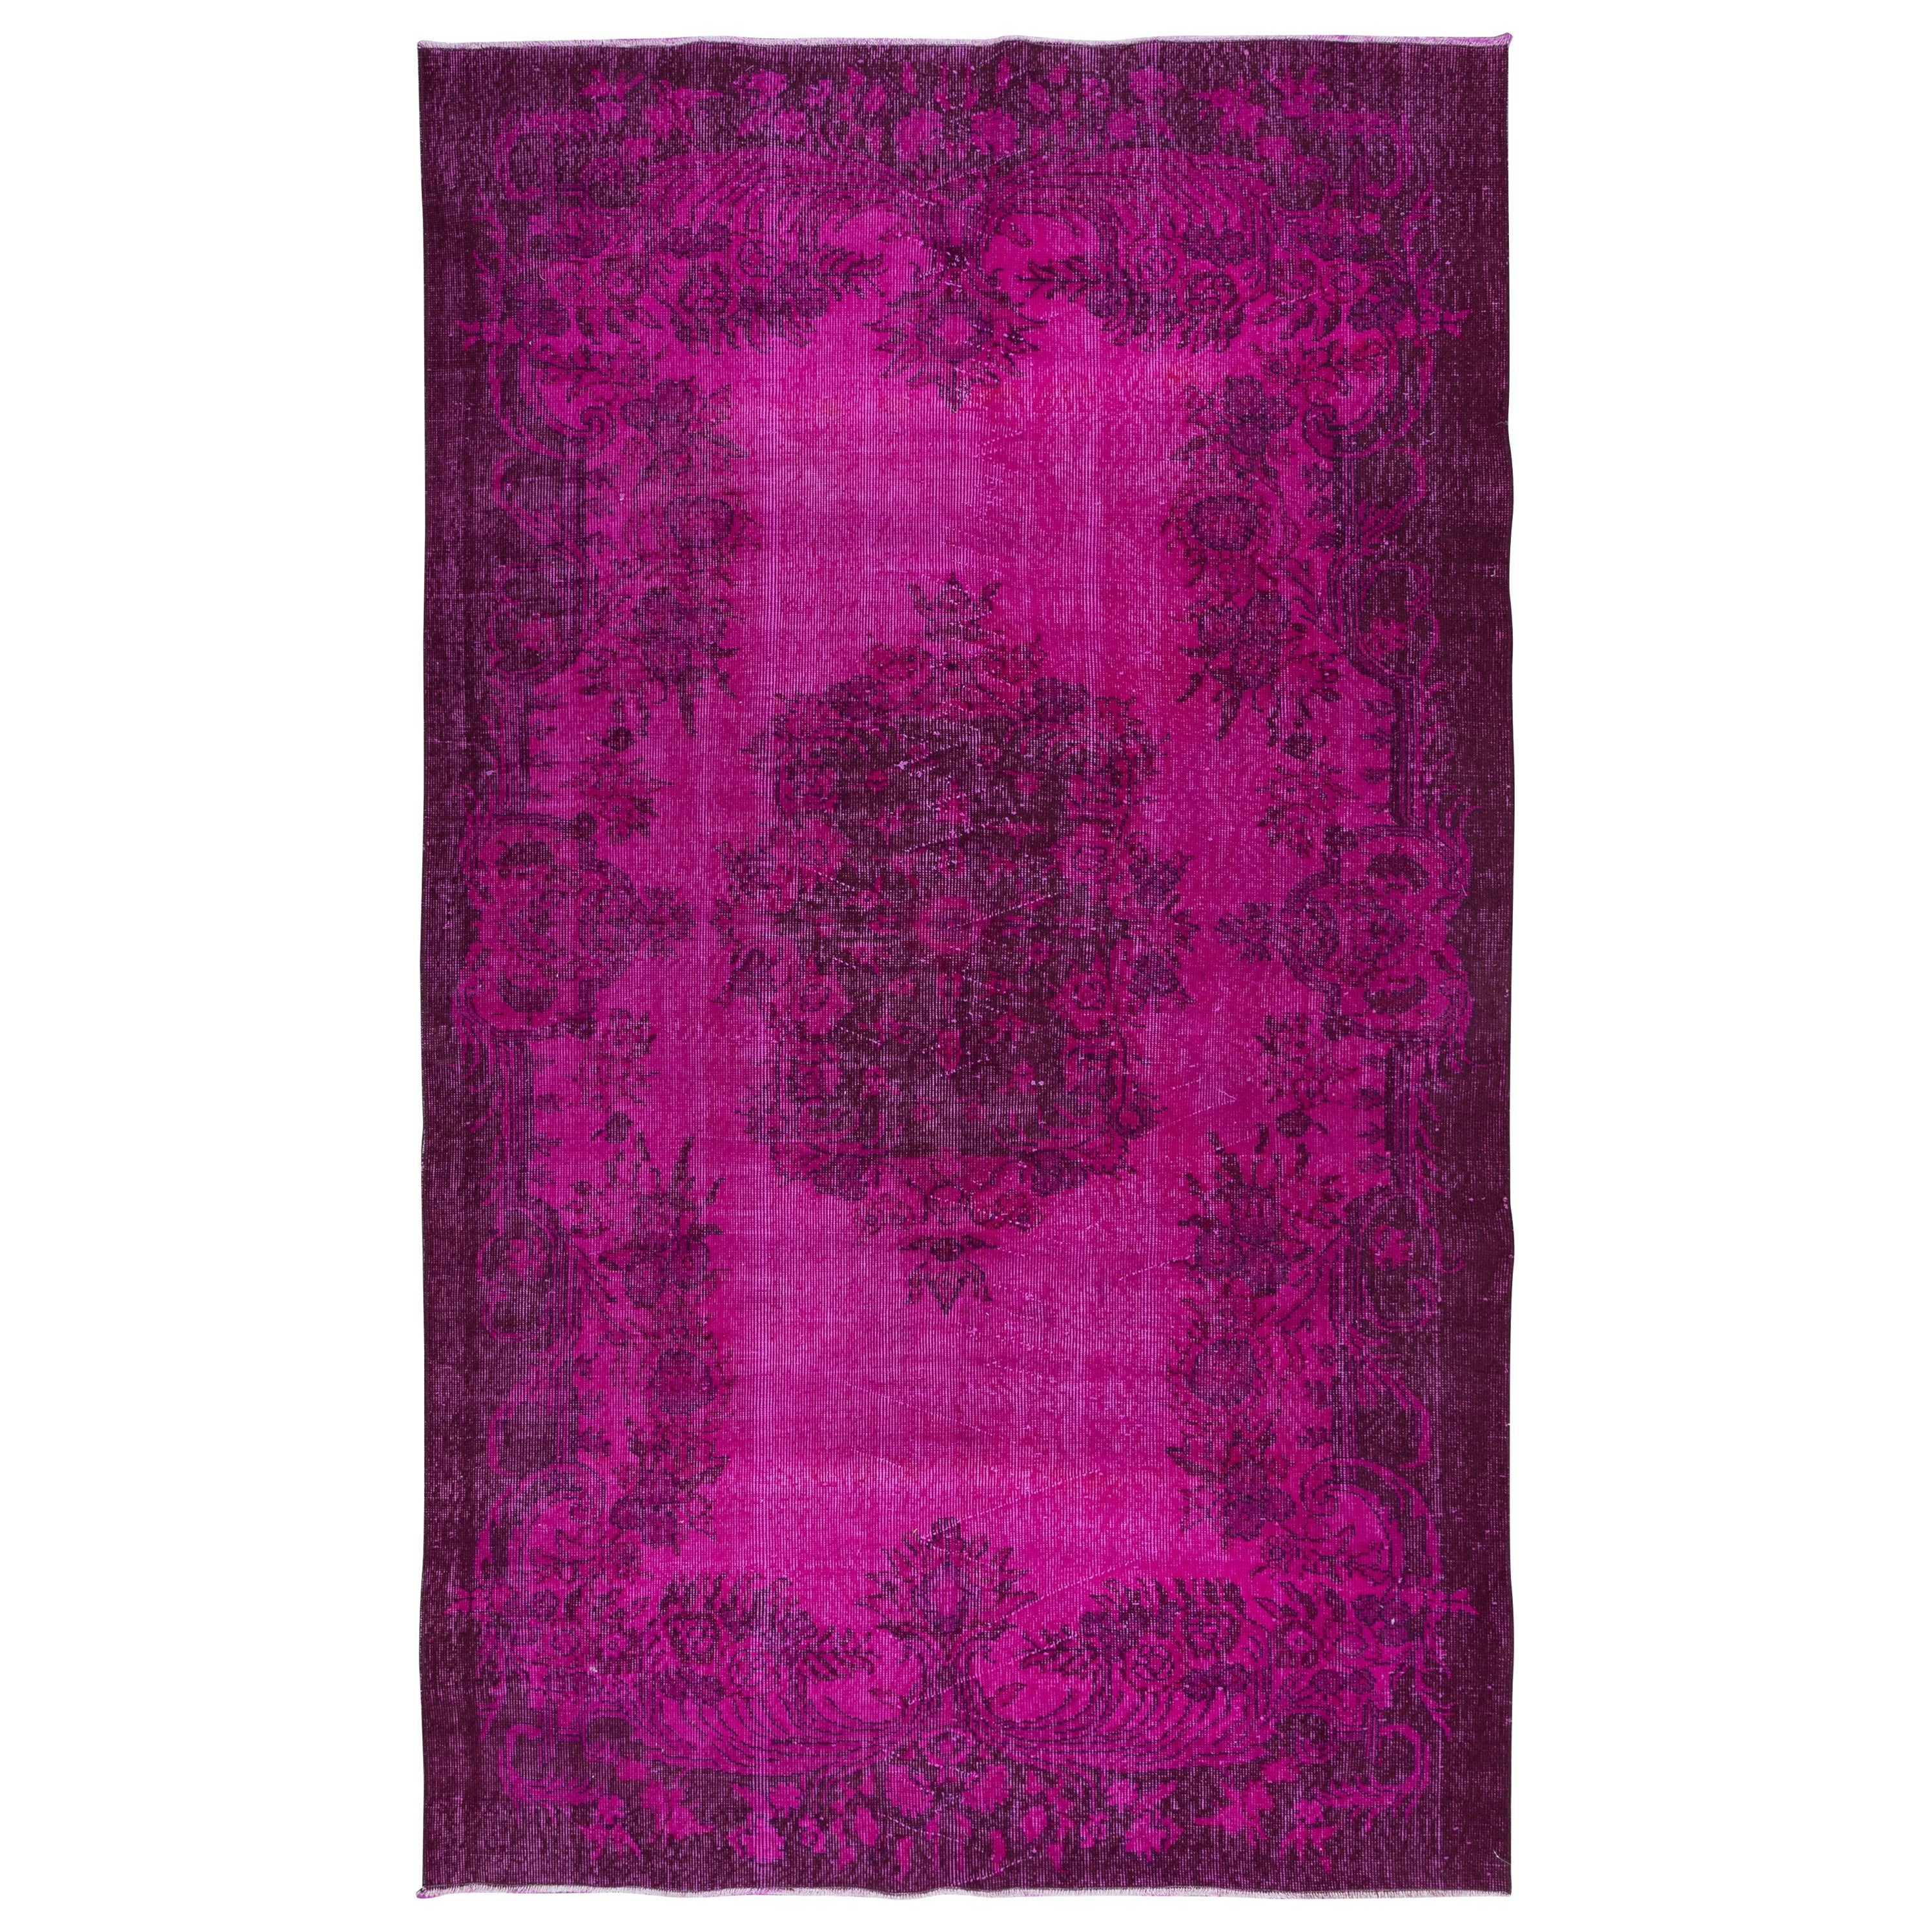 5.7x9.2 Ft Aubusson Inspired Pink Rug for Modern Interiors, Handmade in Turkey (Tapis rose inspiré d'Aubusson pour les intérieurs modernes)